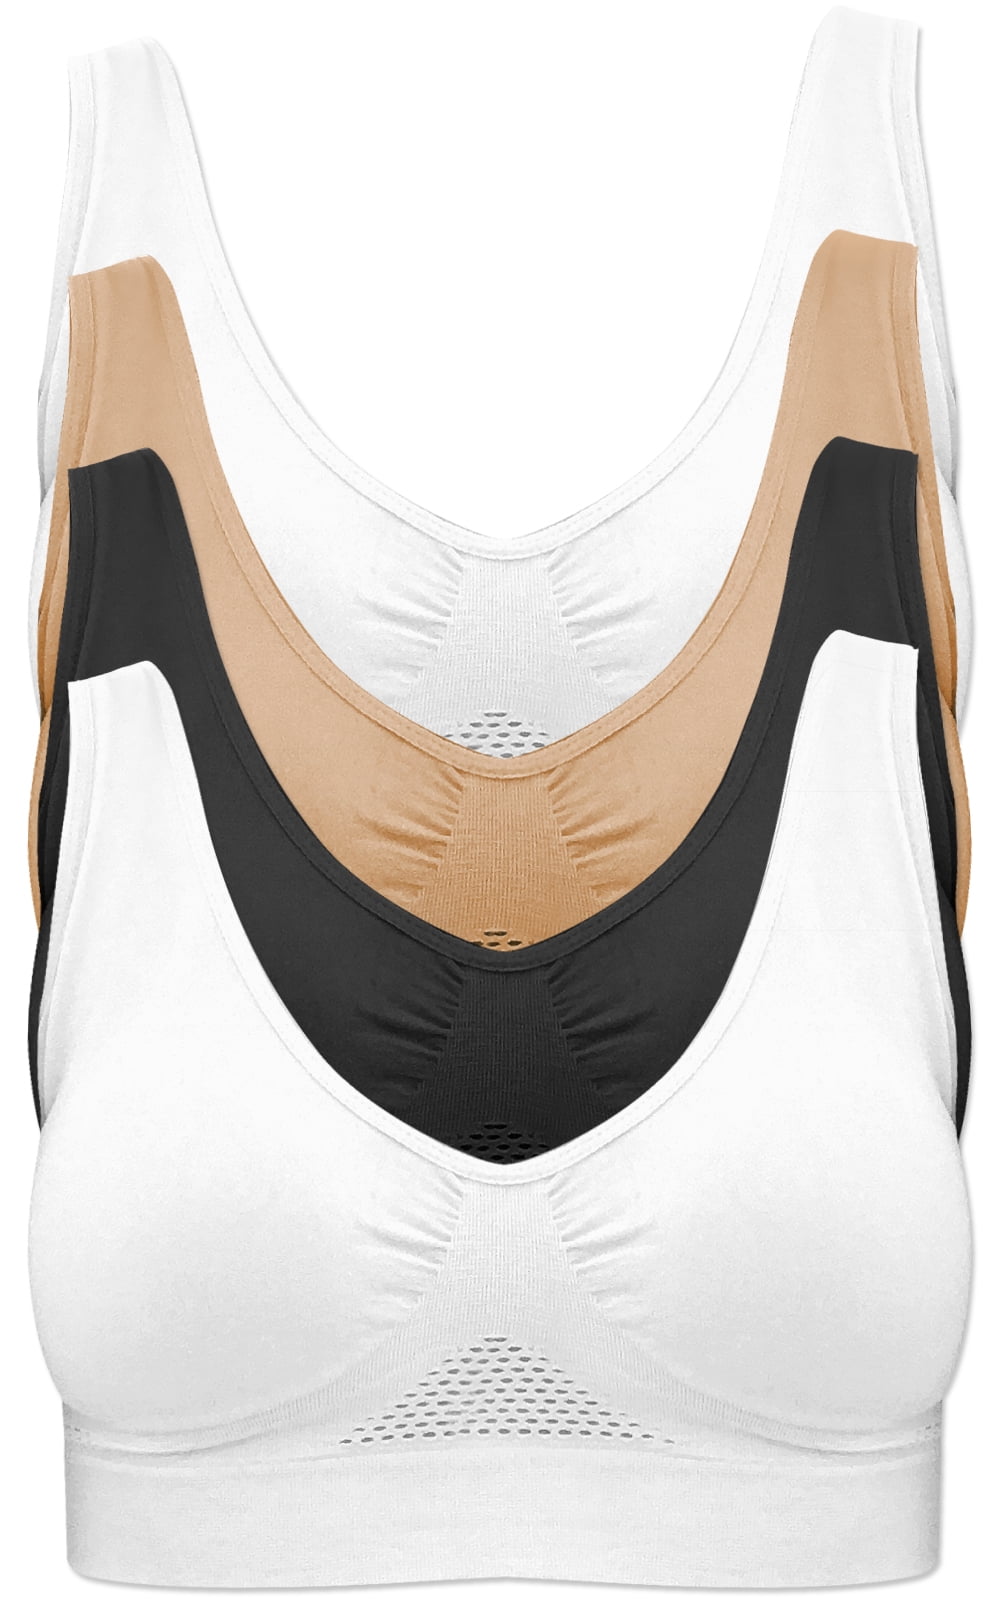 Women's Warner's RM4281A Play it Cool Wire-Free Cooling Racerback